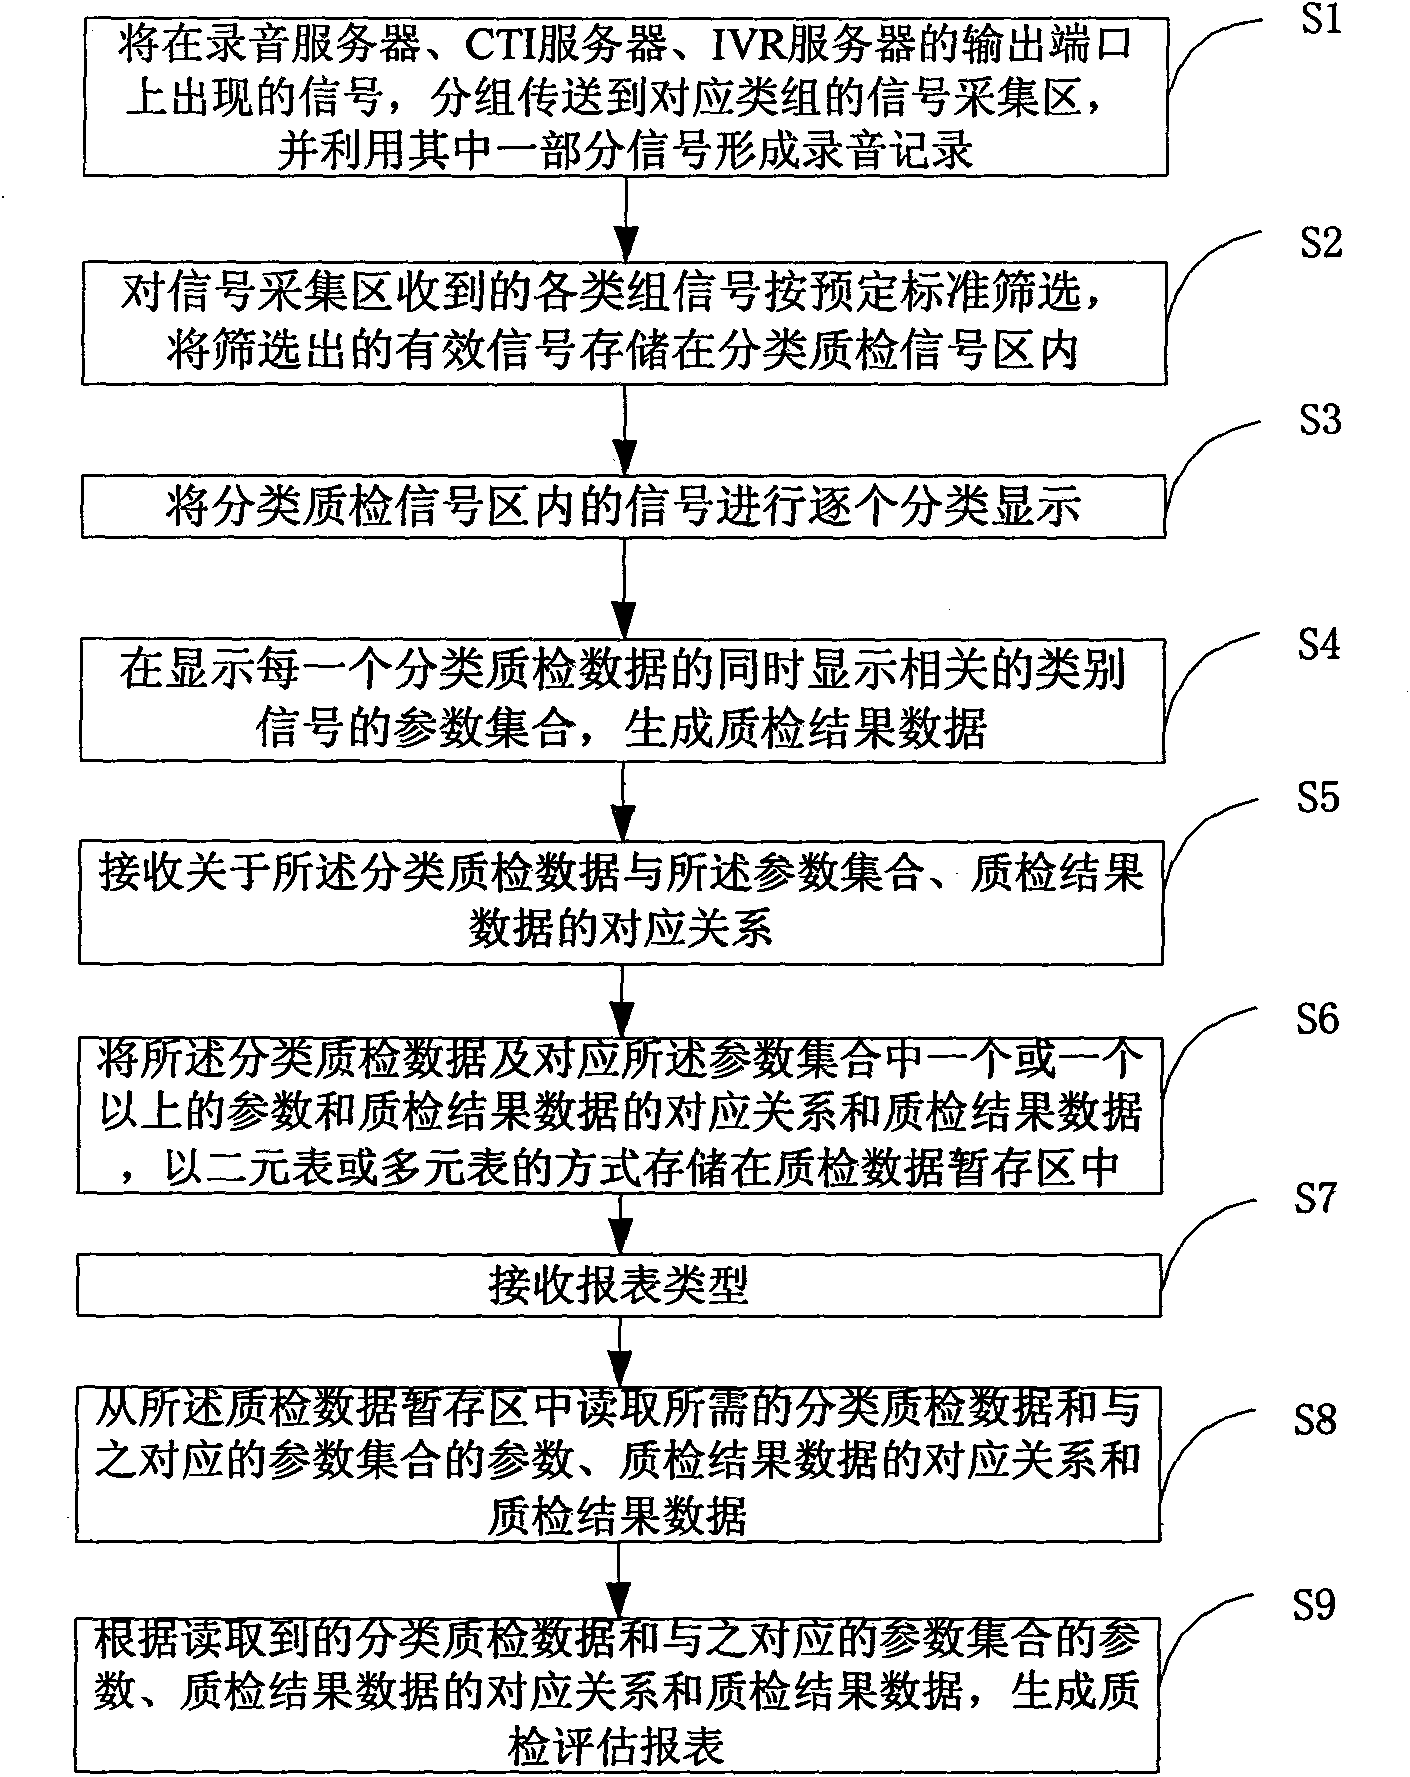 Method for generating quality detecting data of calling center